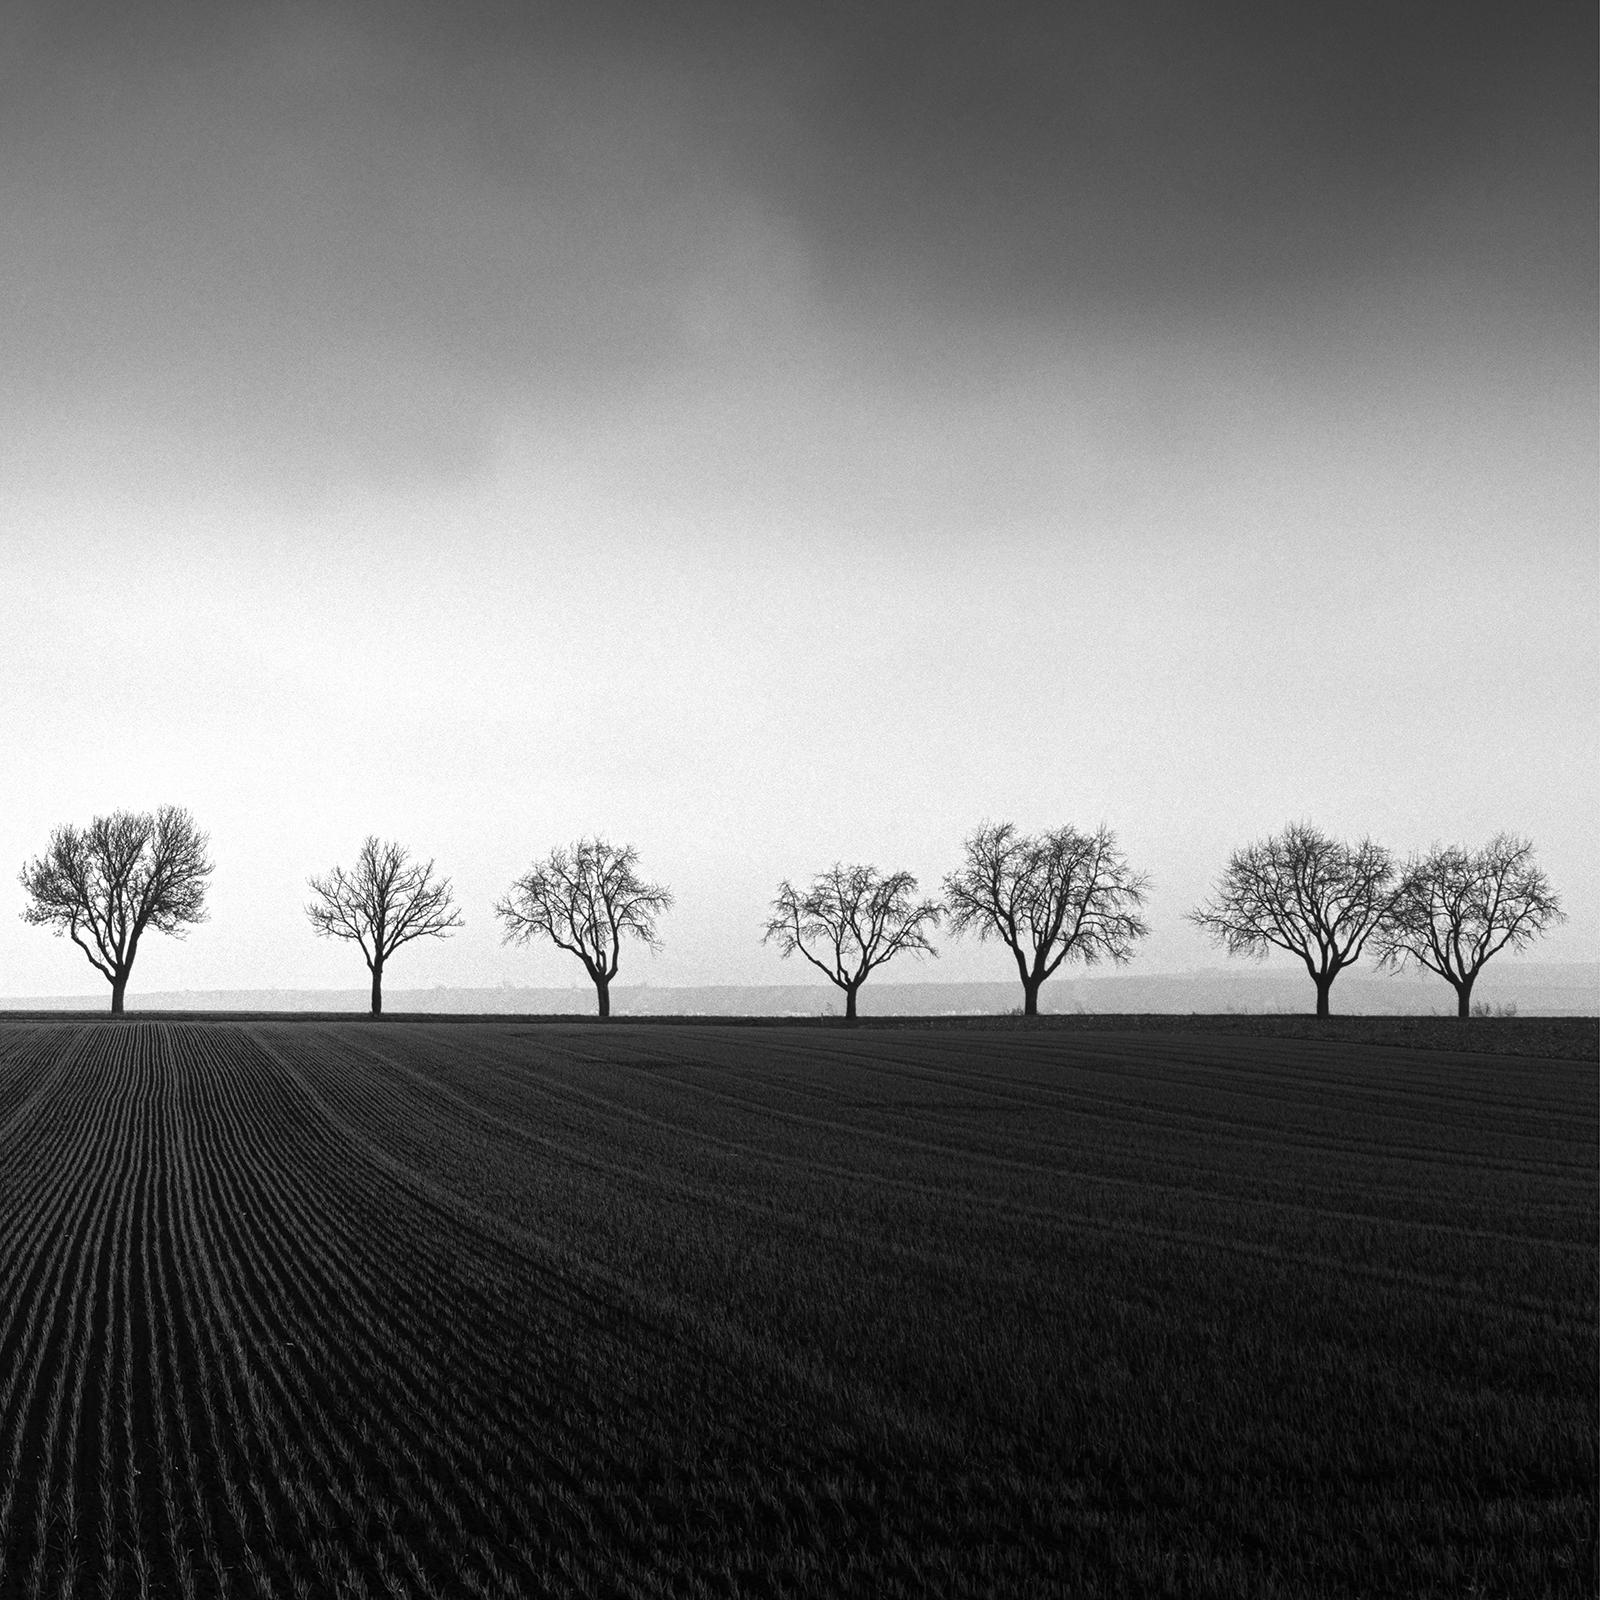 Fourteen Cherry Trees, Cornfield, black and white photography, art, landscape For Sale 5